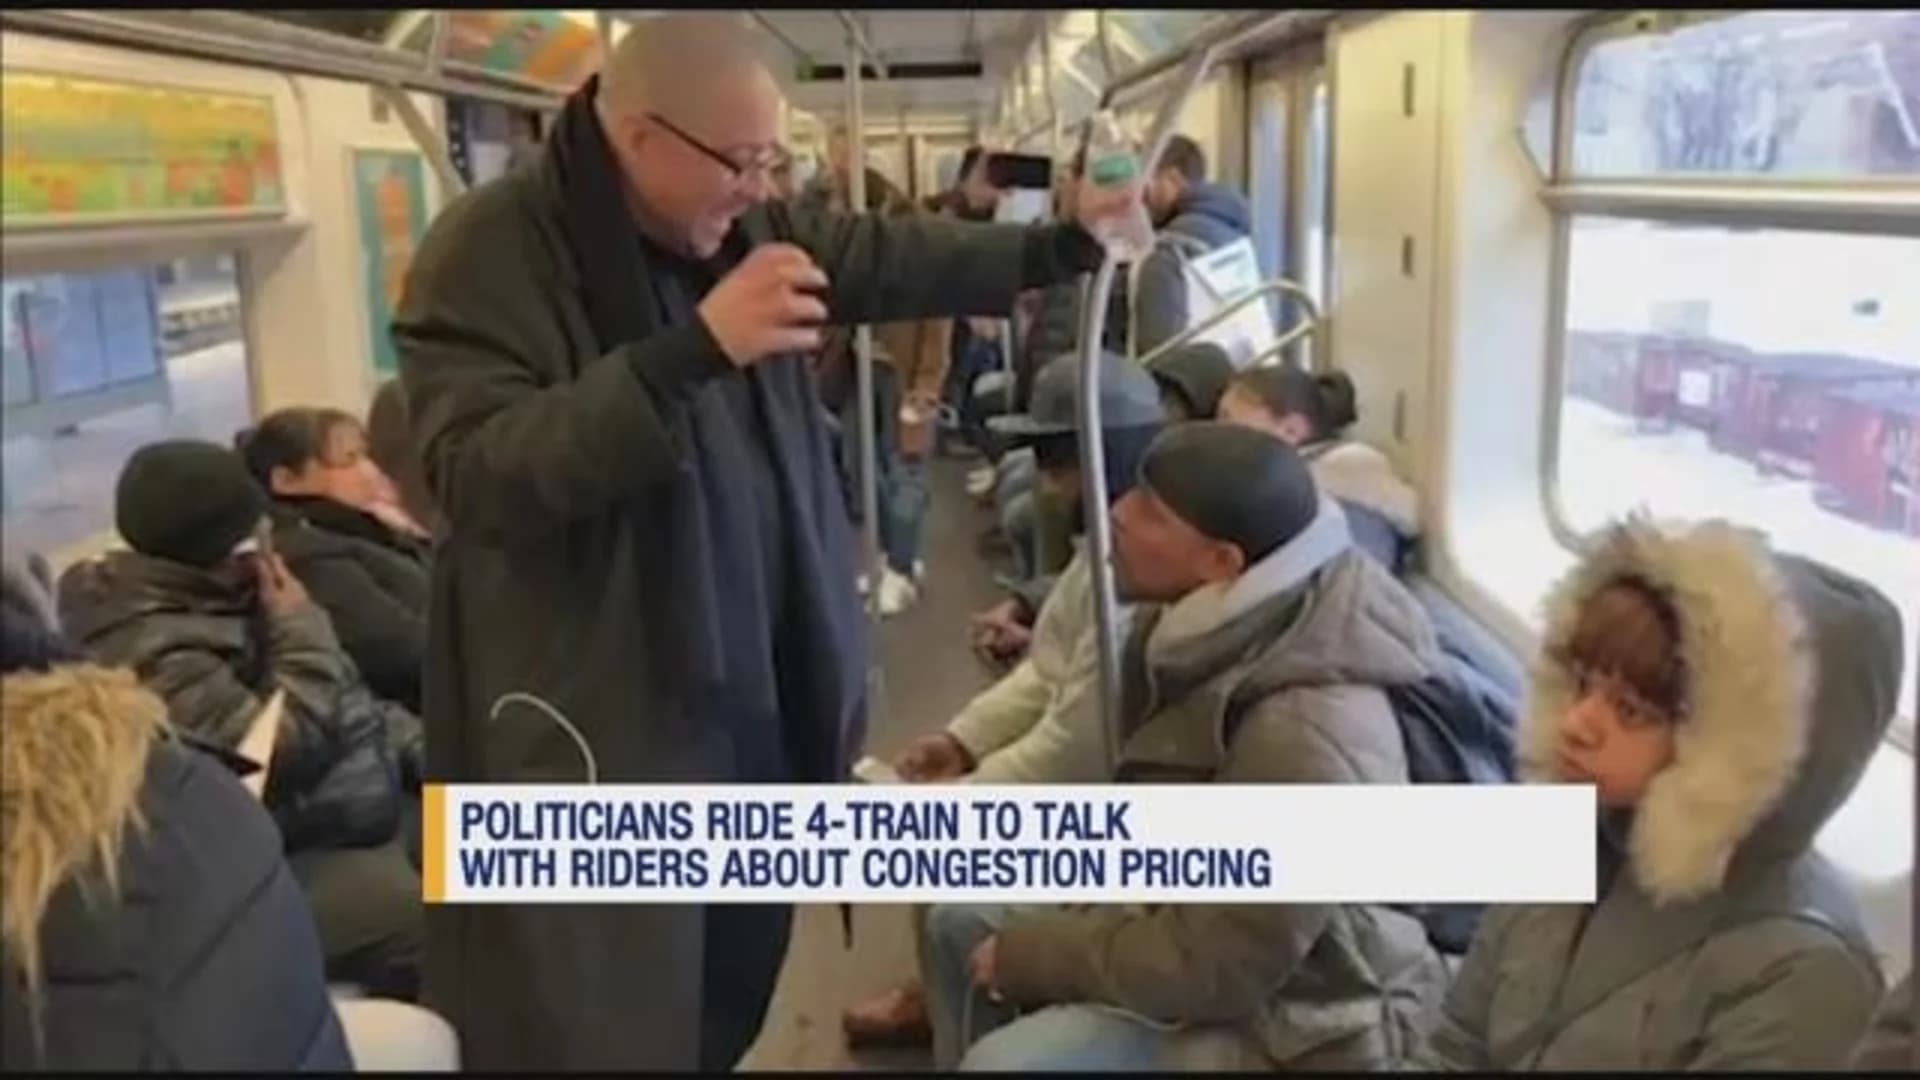 State senator and advocacy group ride 4 train, talk to riders about congestion pricing